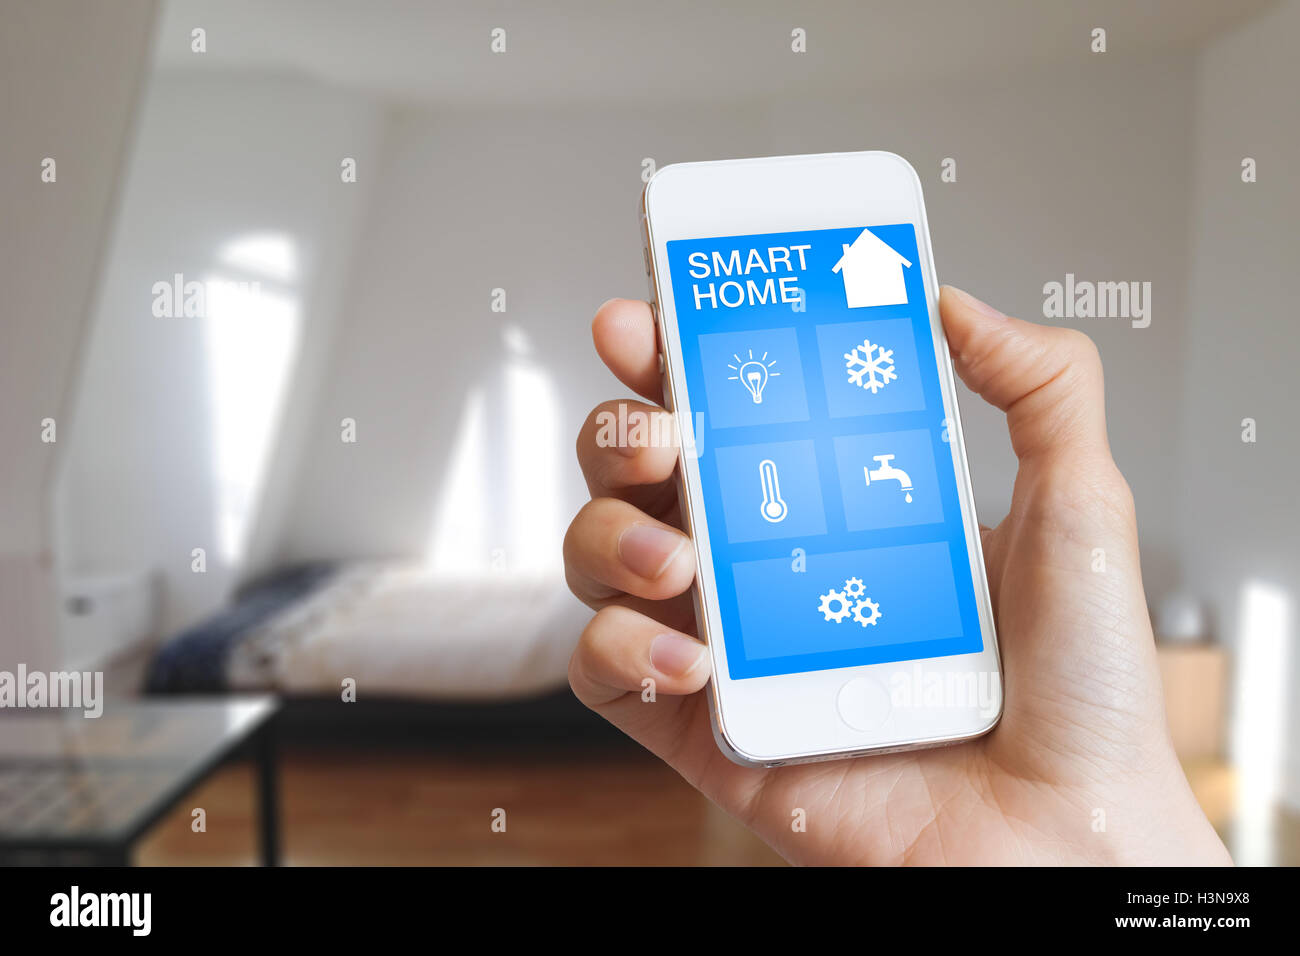 Smart home automation app on smartphone hold by female’s hand with home interior in background Stock Photo